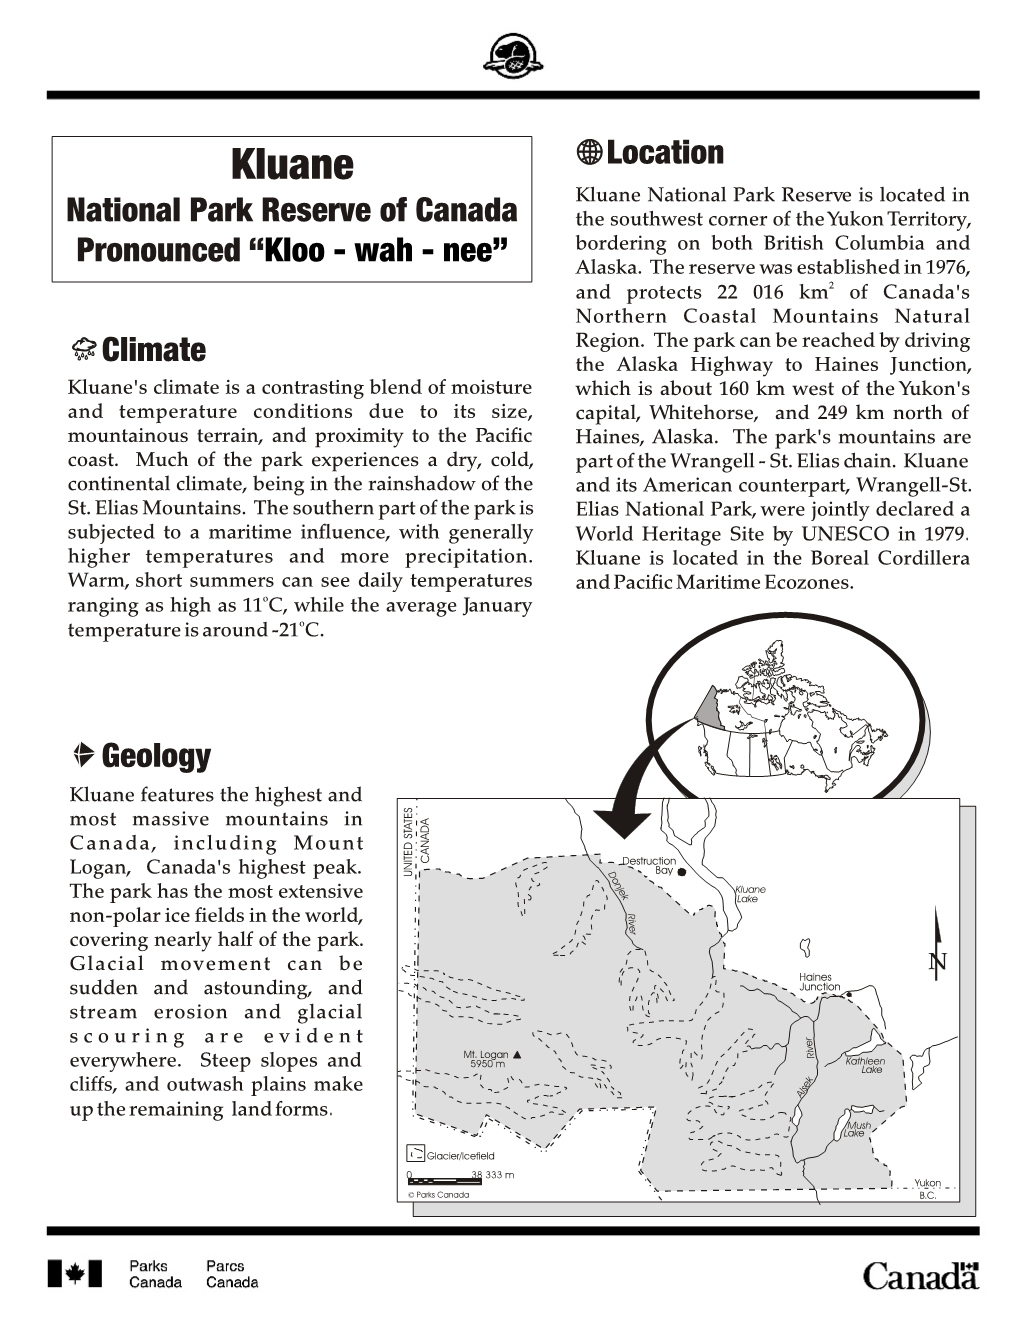 Kluane National Park and Reserve of Canada